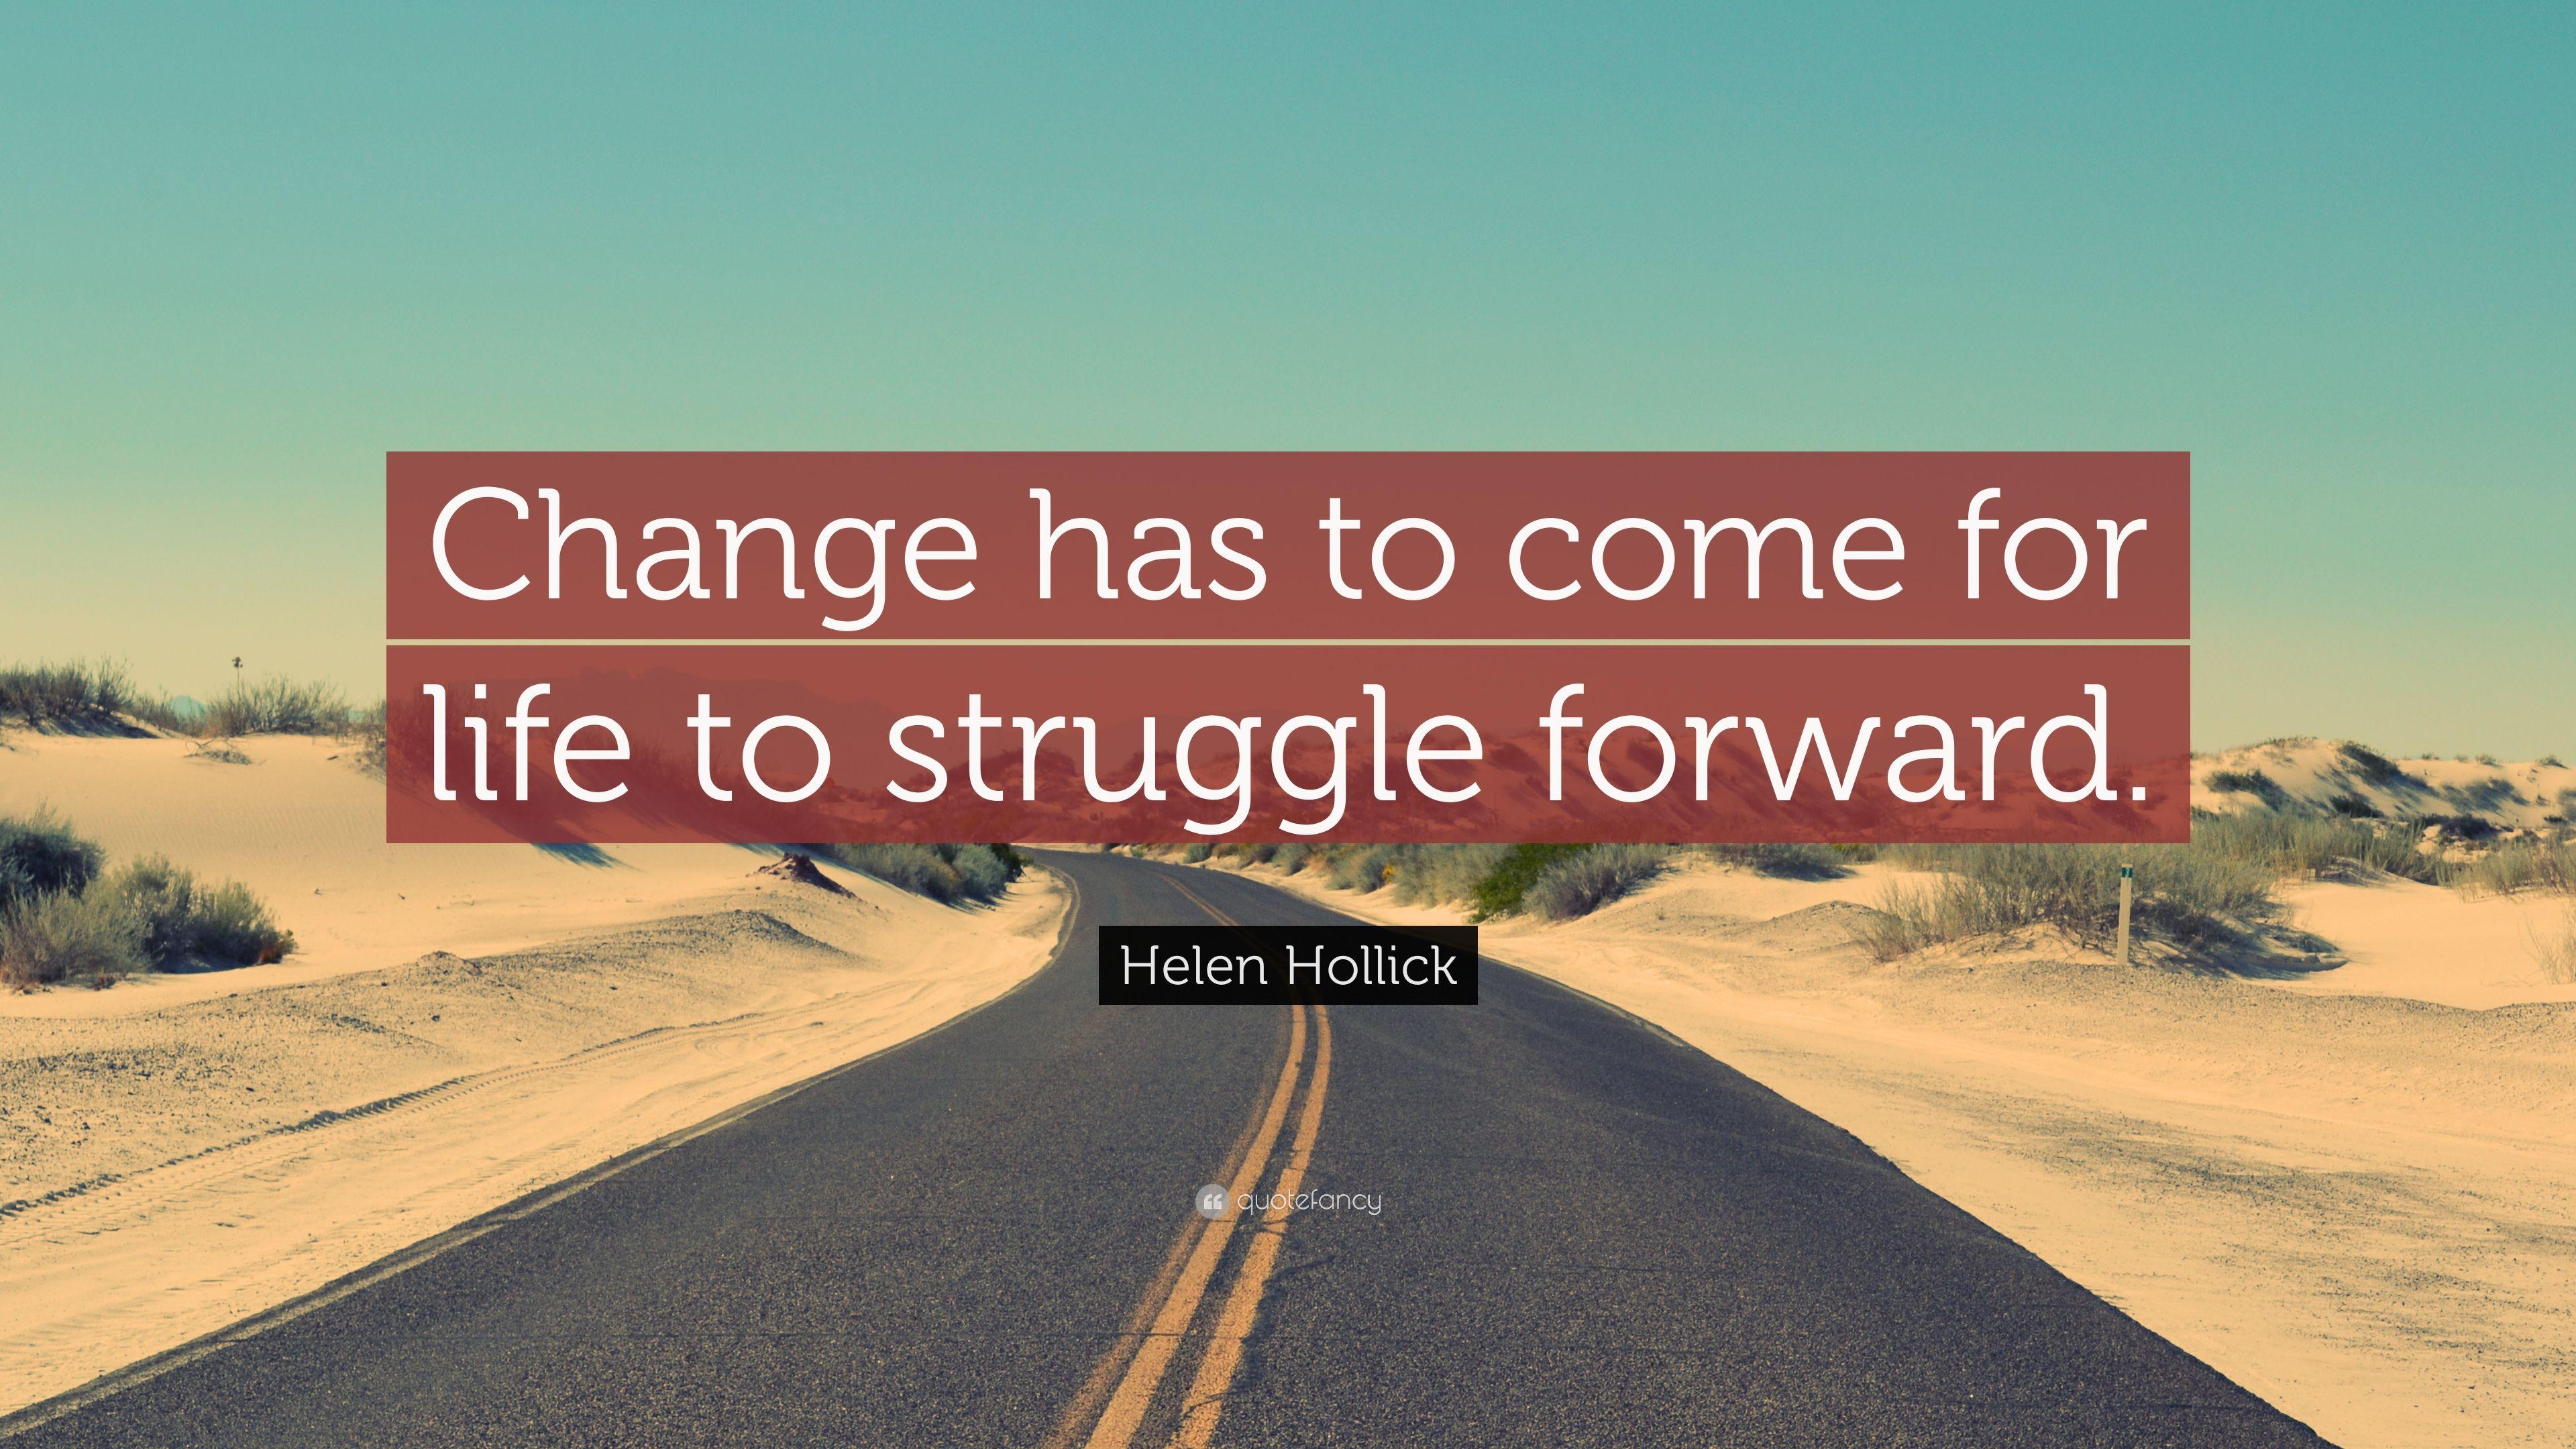 Helen Hollick Quote: “Change has to come for life to struggle